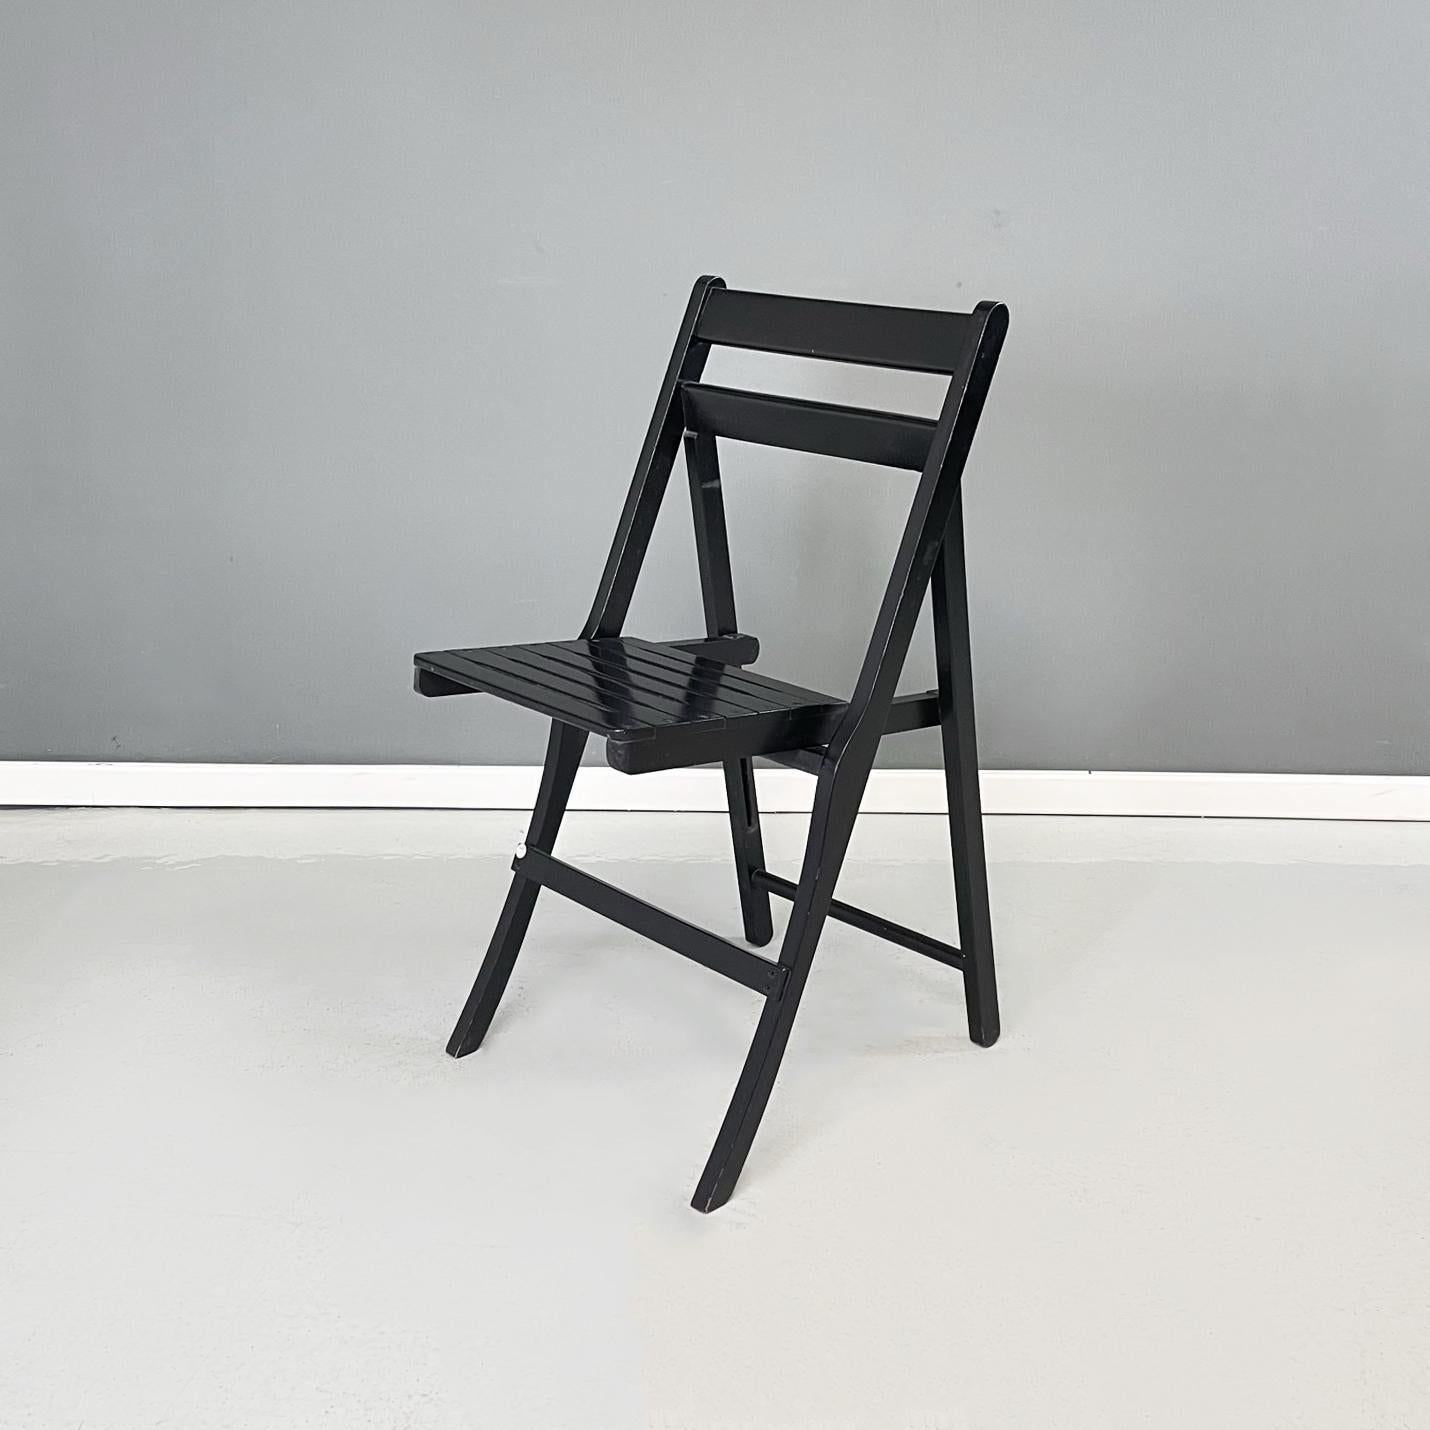 Italian modern Wood folding chair Morettina by Ettore Moretti for Zanotta, 1970s
Folding chair mod. Morettina in black painted wood. The backrest and seat is made up of a series of slats.
Produced by Zanotta in 1970s and designed by Ettore Moretti.